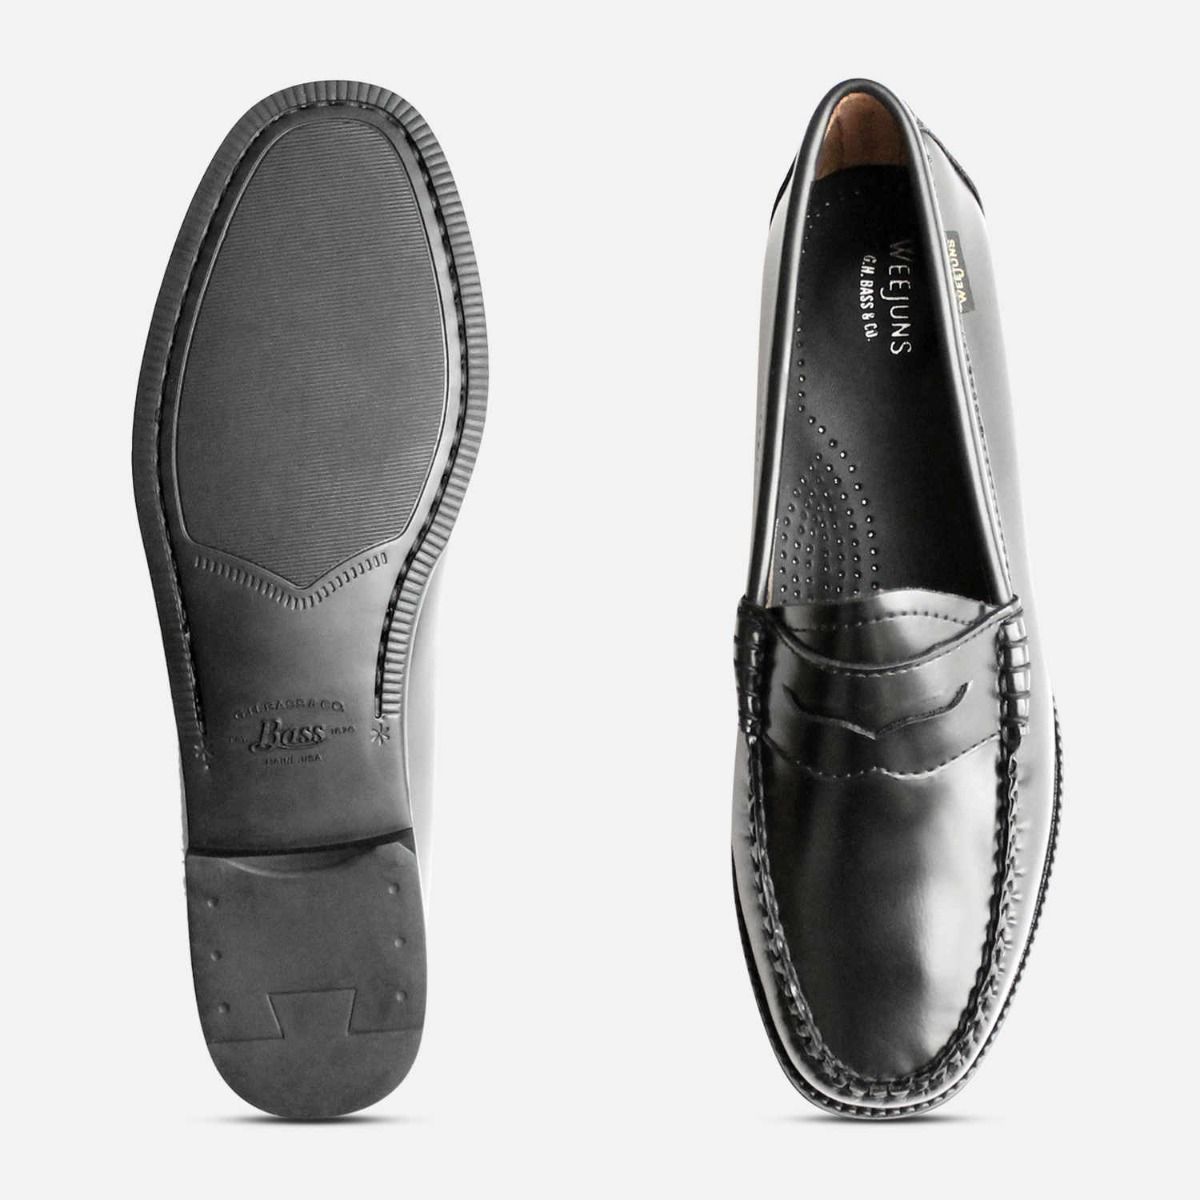 Bass Weejun II Loafers in Black Leather with Rubber Sole